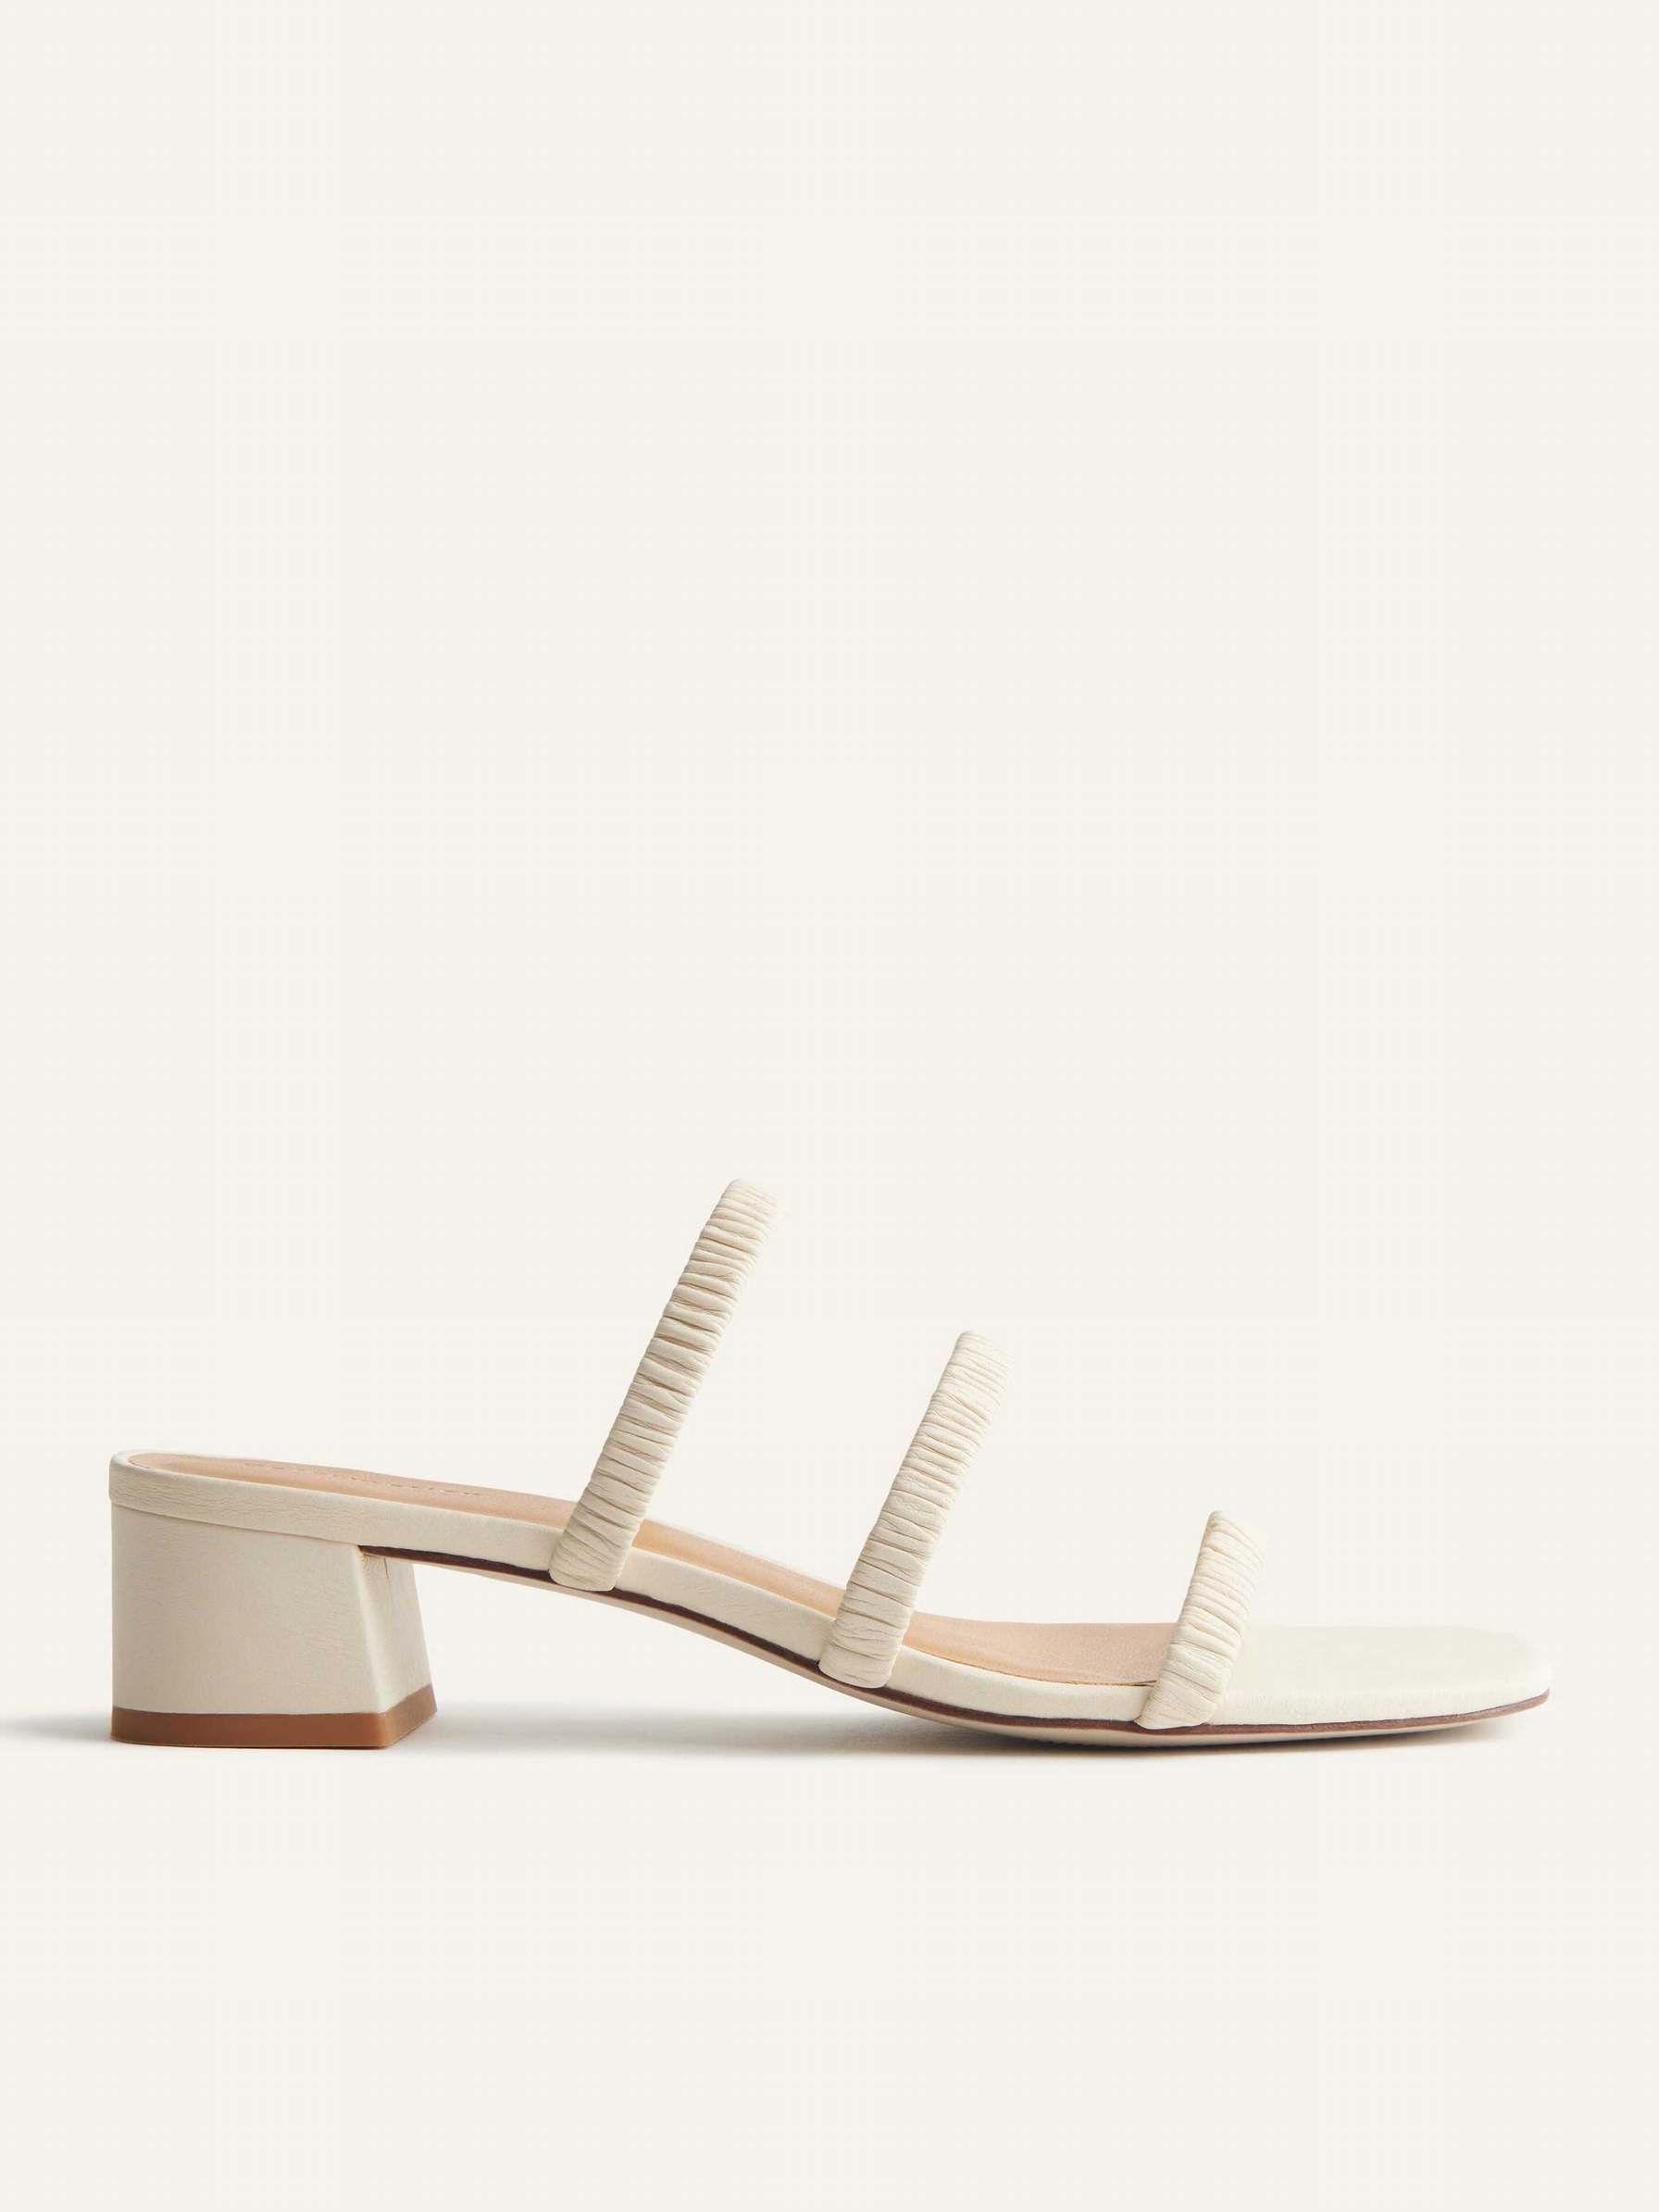 Reformation Assunta Strappy Women's Mules White | OUTLET-825173